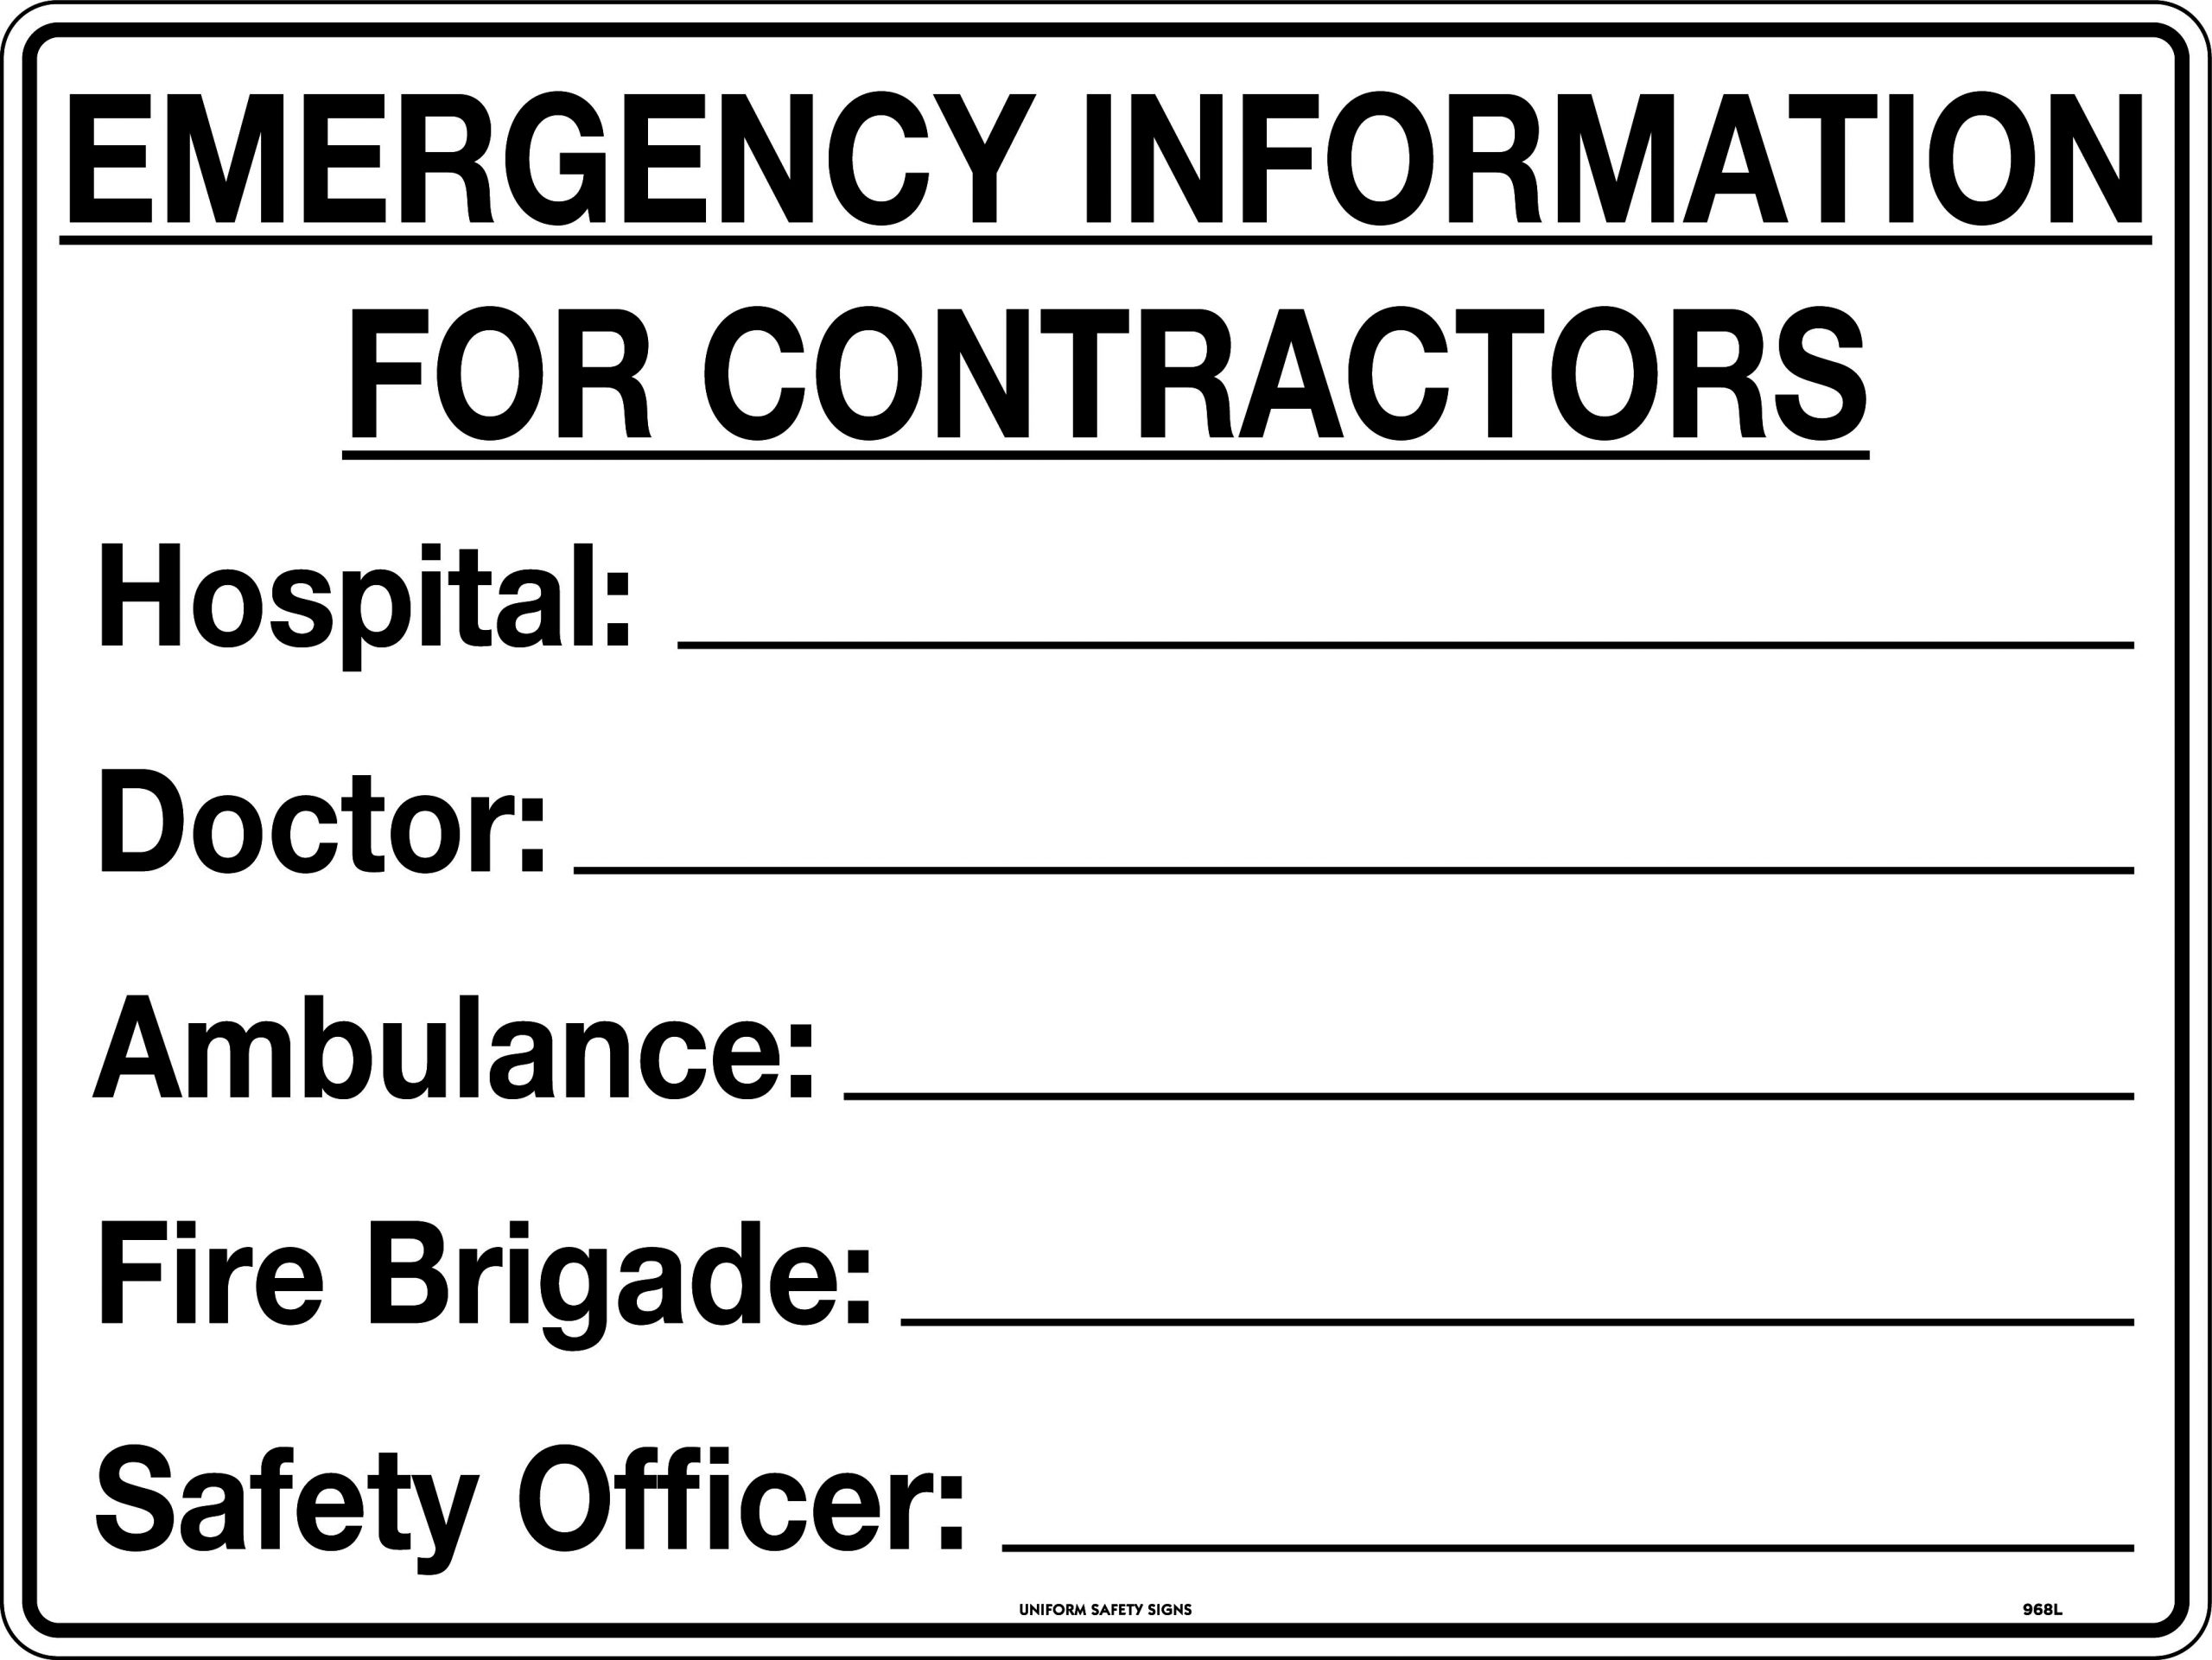 UNIFORM SAFETY 600X450MM CORFLUTE EMERGENCY INFORMATION FOR CONTRACTOR